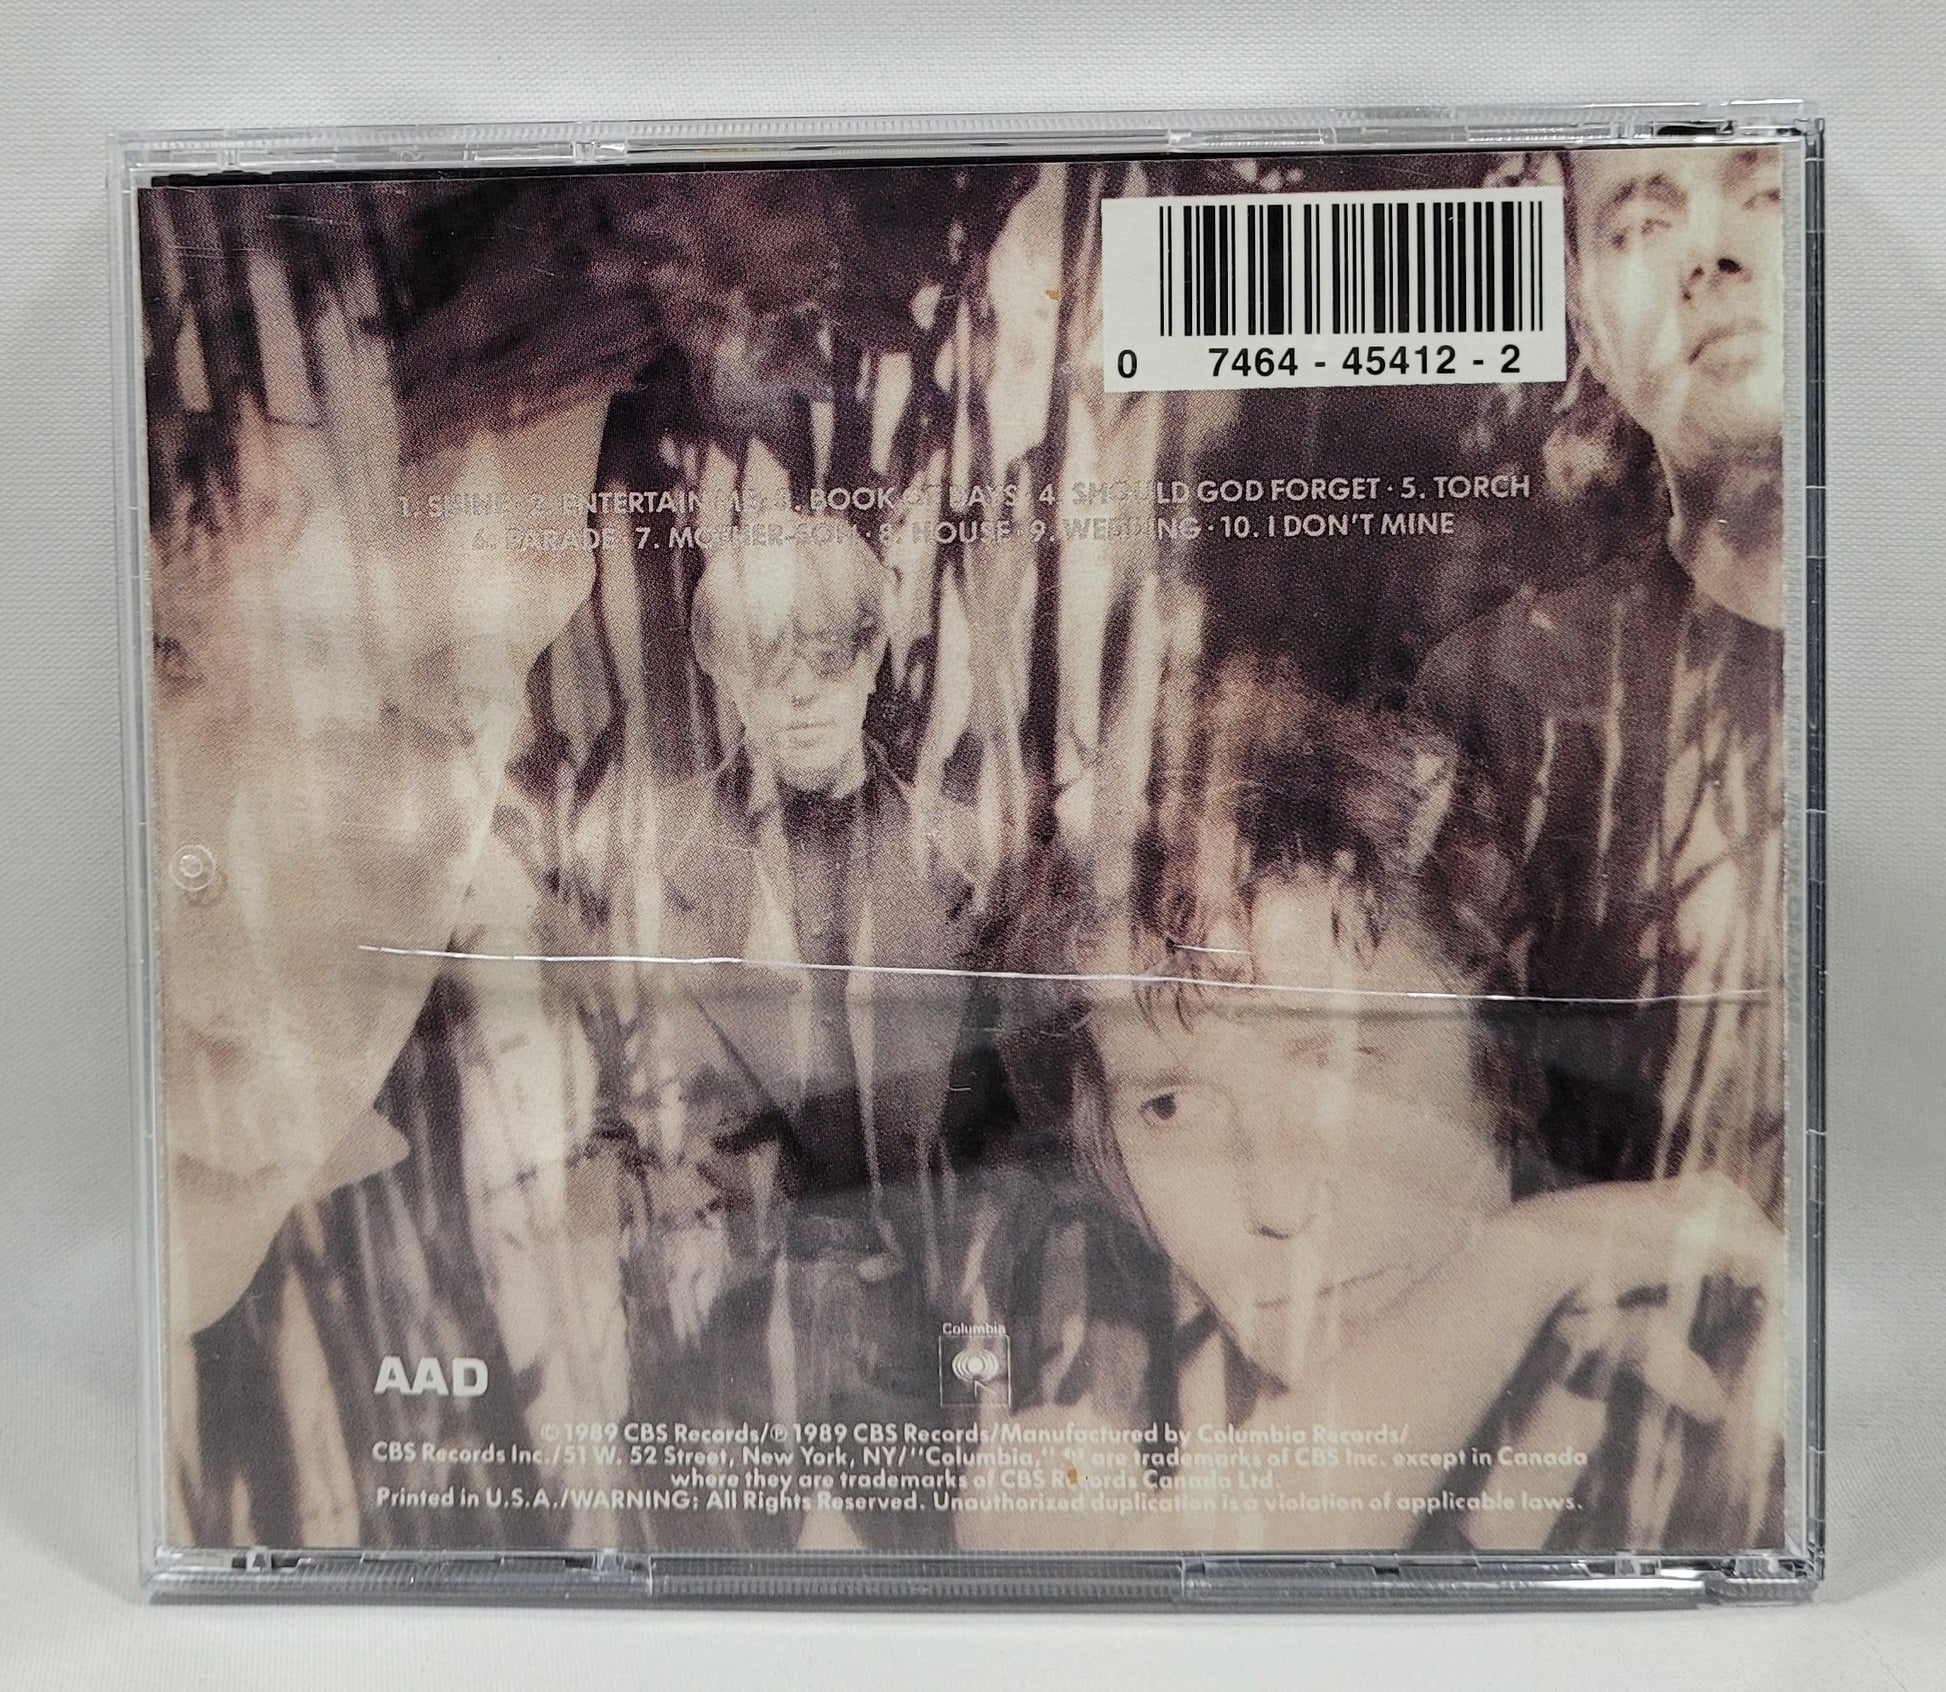 The Psychedelic Furs - Book of Days [1989 Used CD]